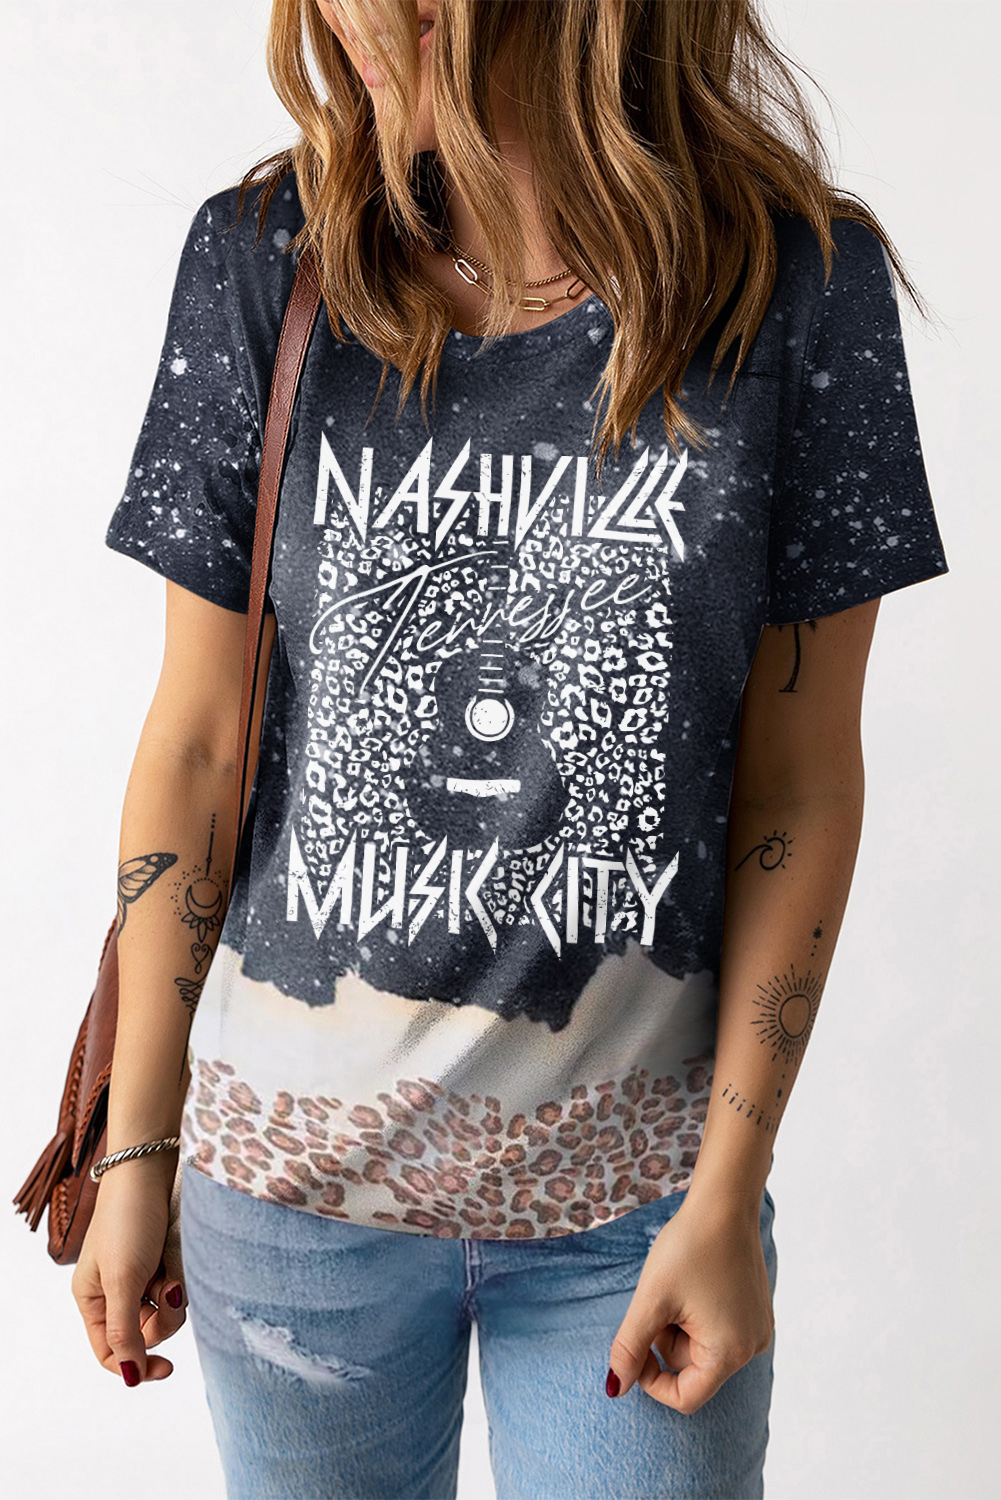 Shewin Wholesale Dropshippers Black NASHVILLE MUSIC CITY Tie Dye Leopard Graphic Tee